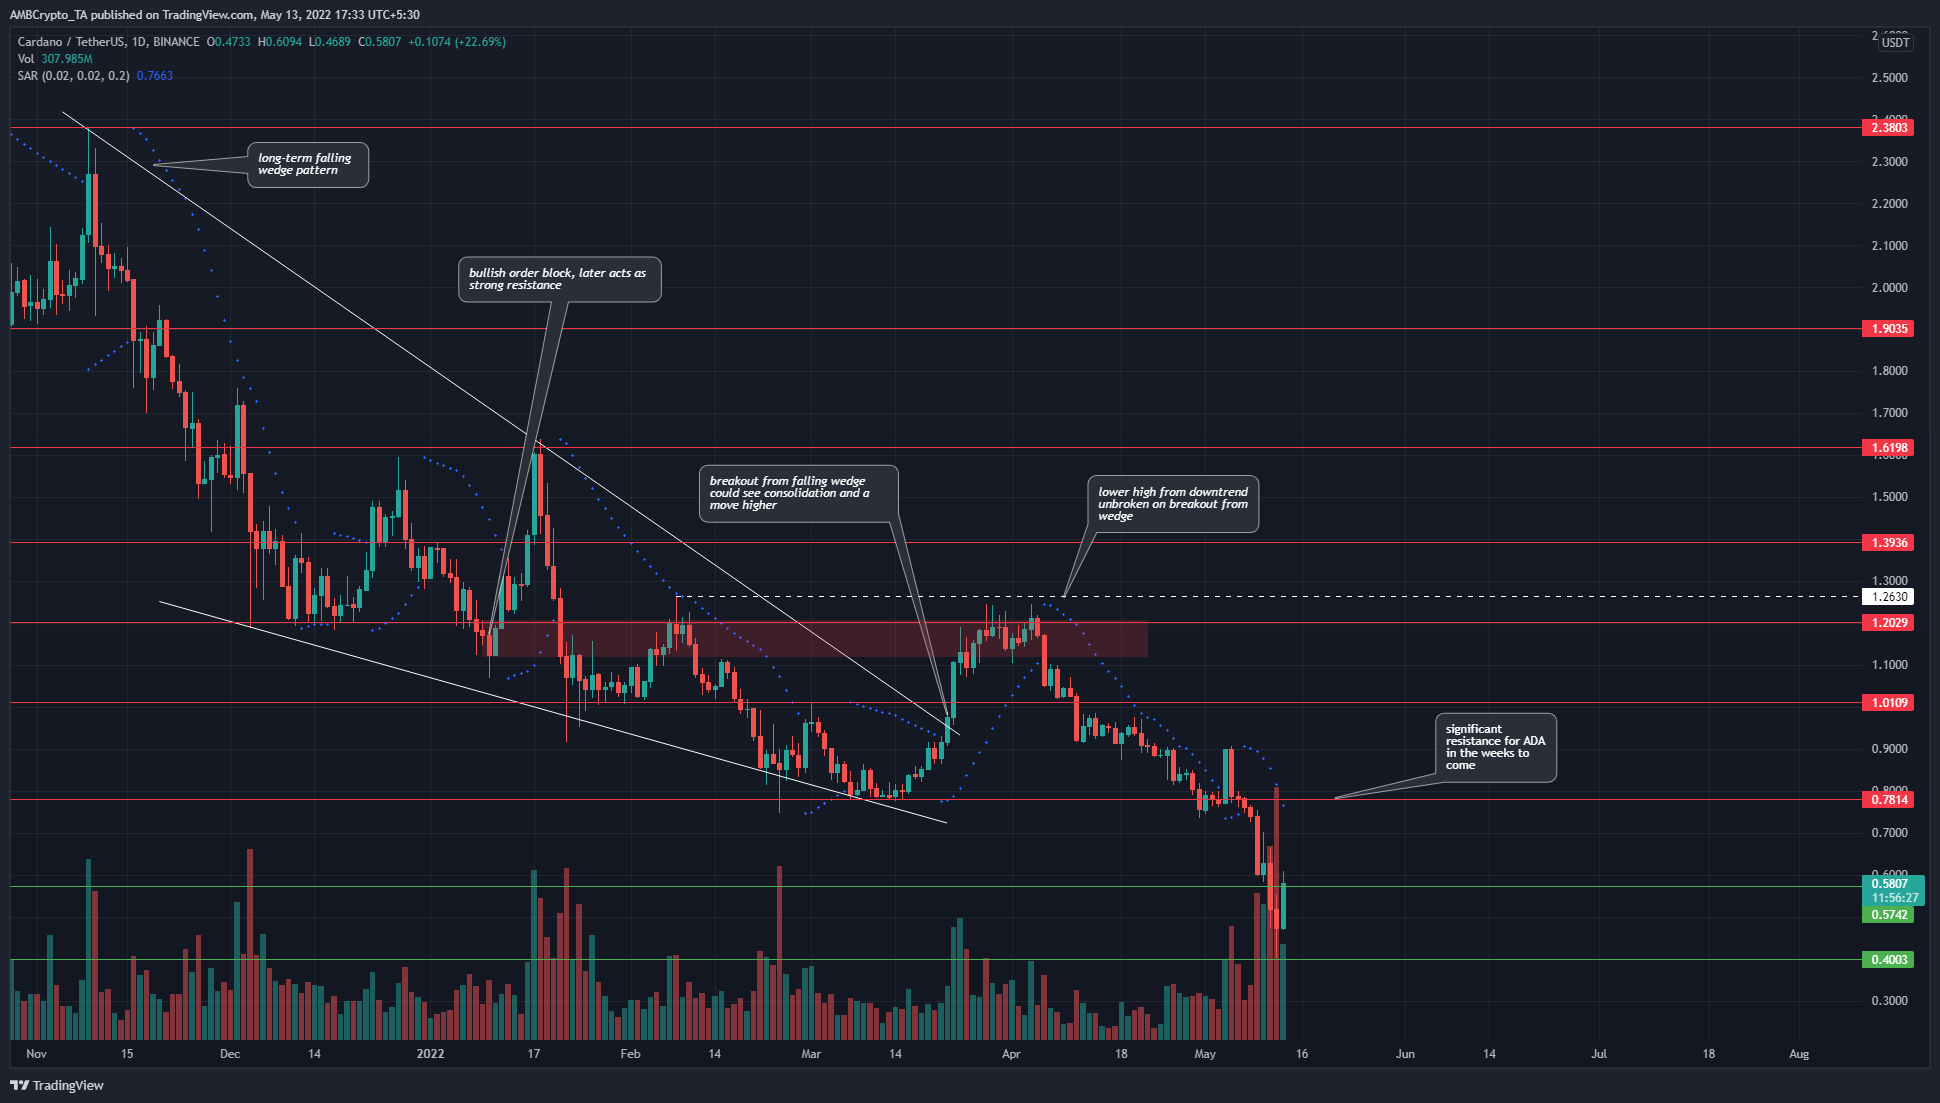 Cardano: ADA finds some demand at the $0.4 level, but the technicals remain adamantly bearish